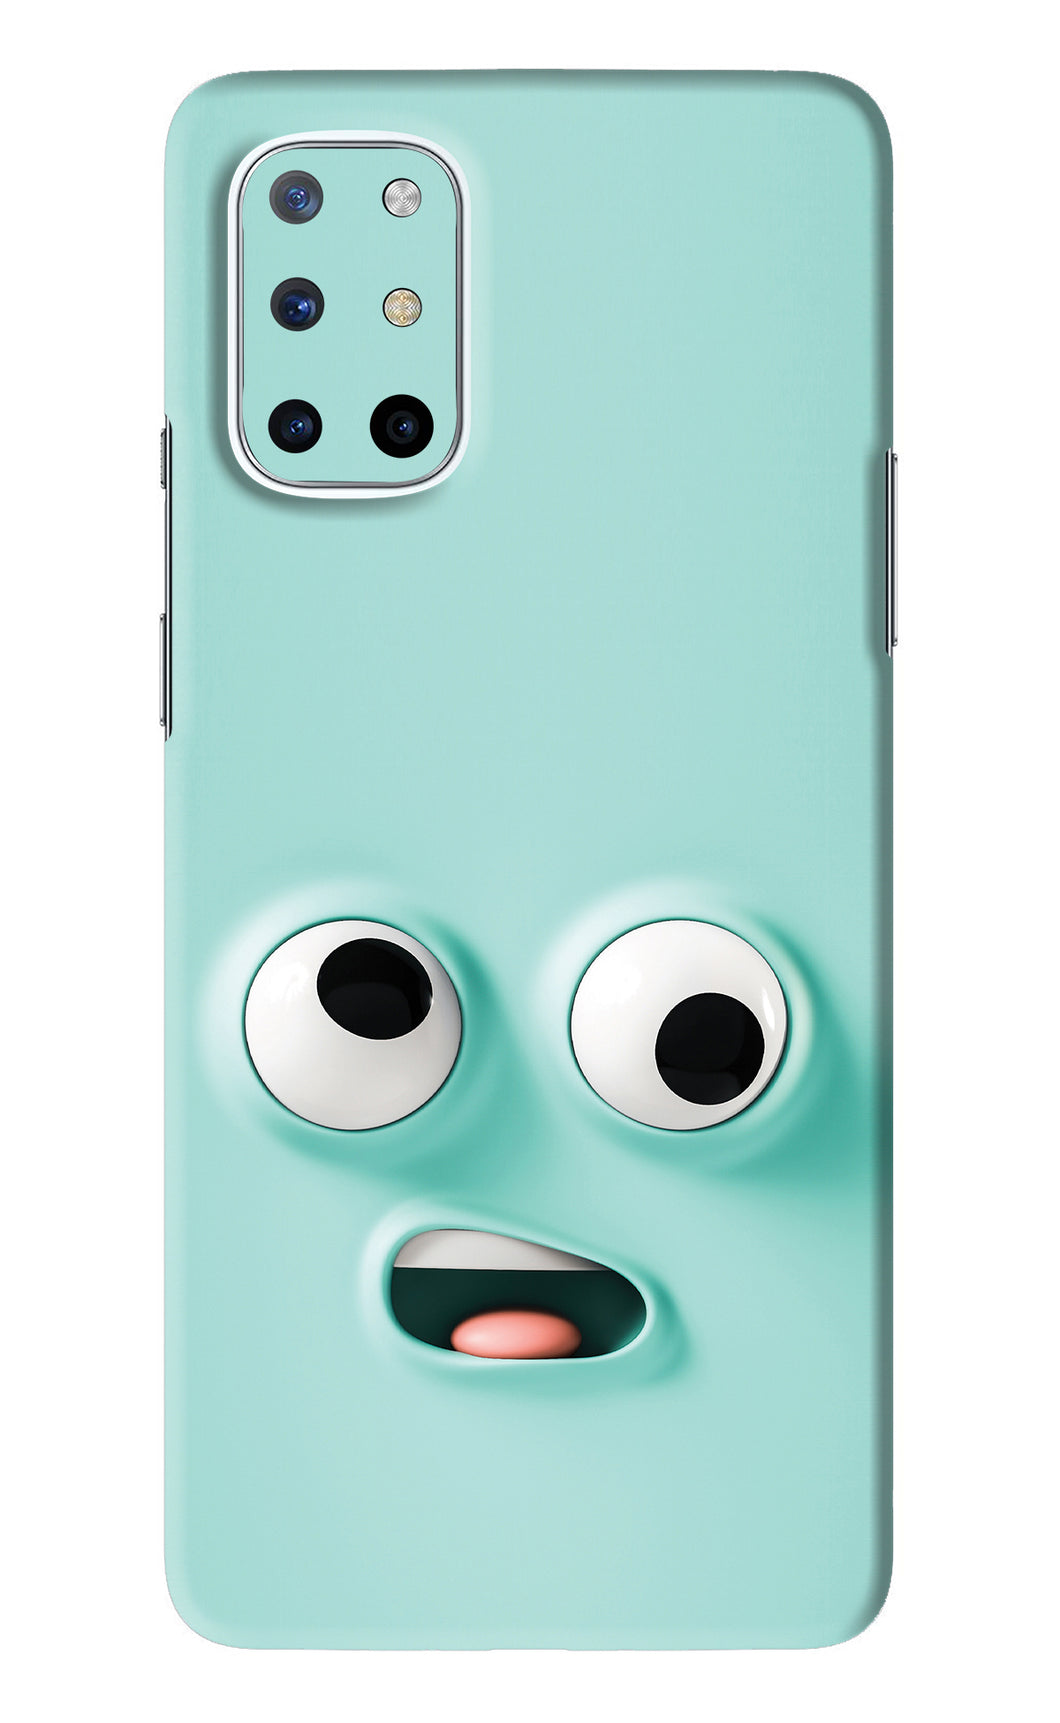 Silly Face Cartoon OnePlus 8T Back Skin Wrap